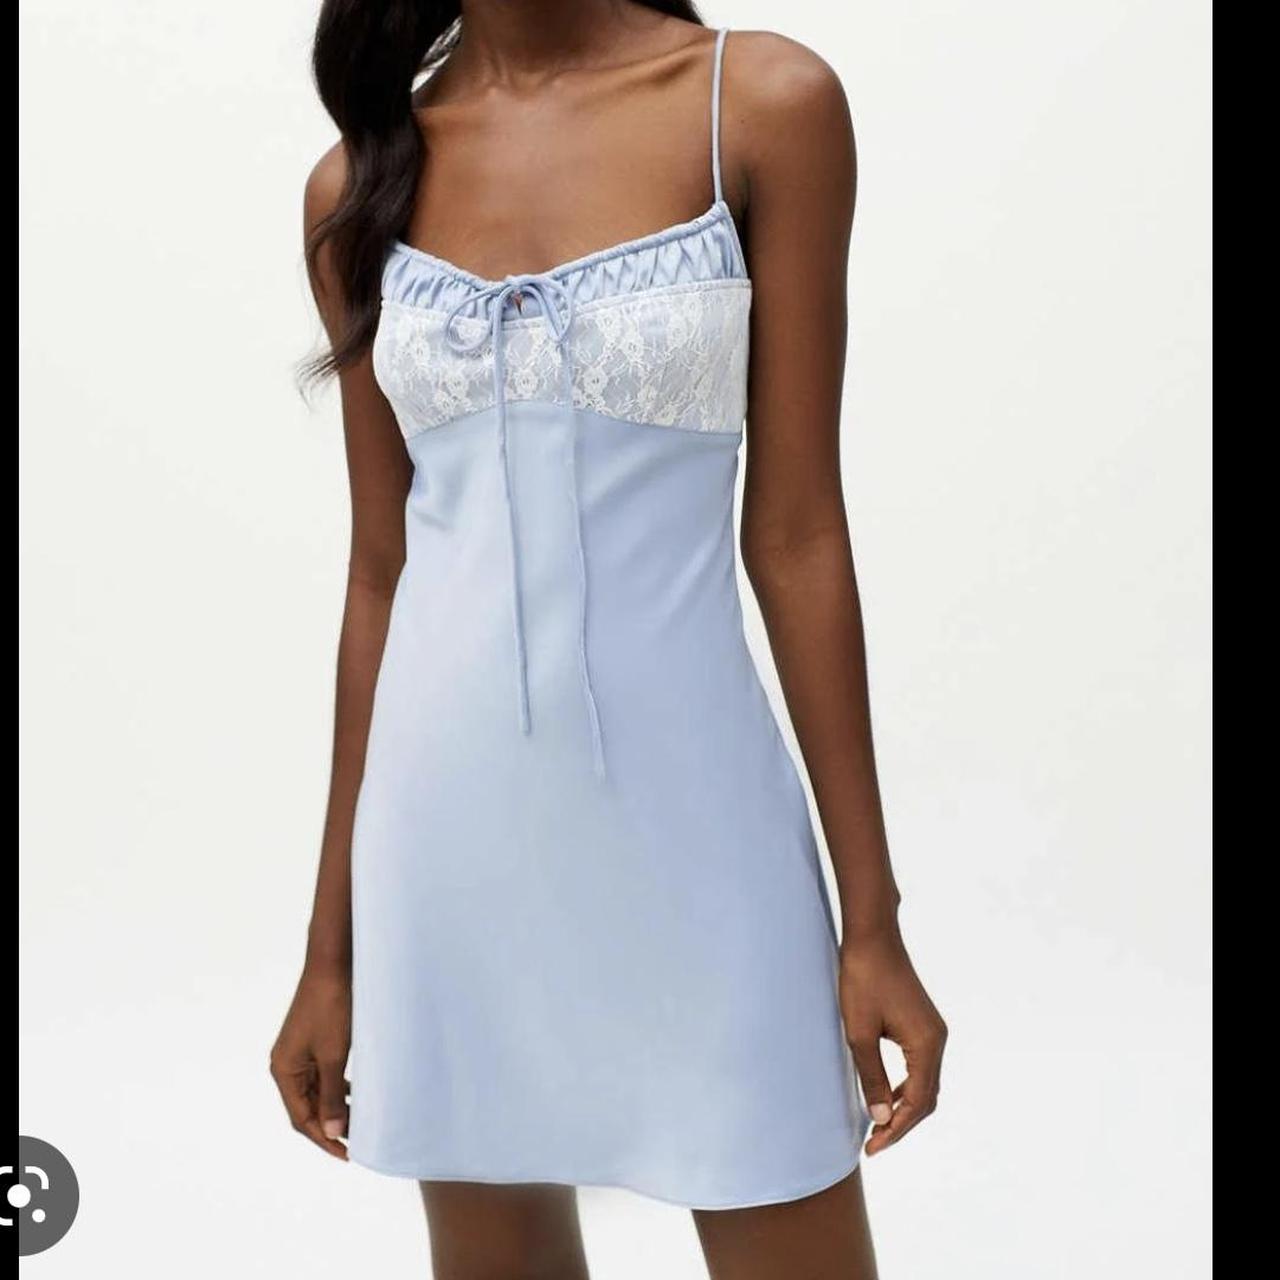 Urban Outfitters Women's White and Blue Dress | Depop